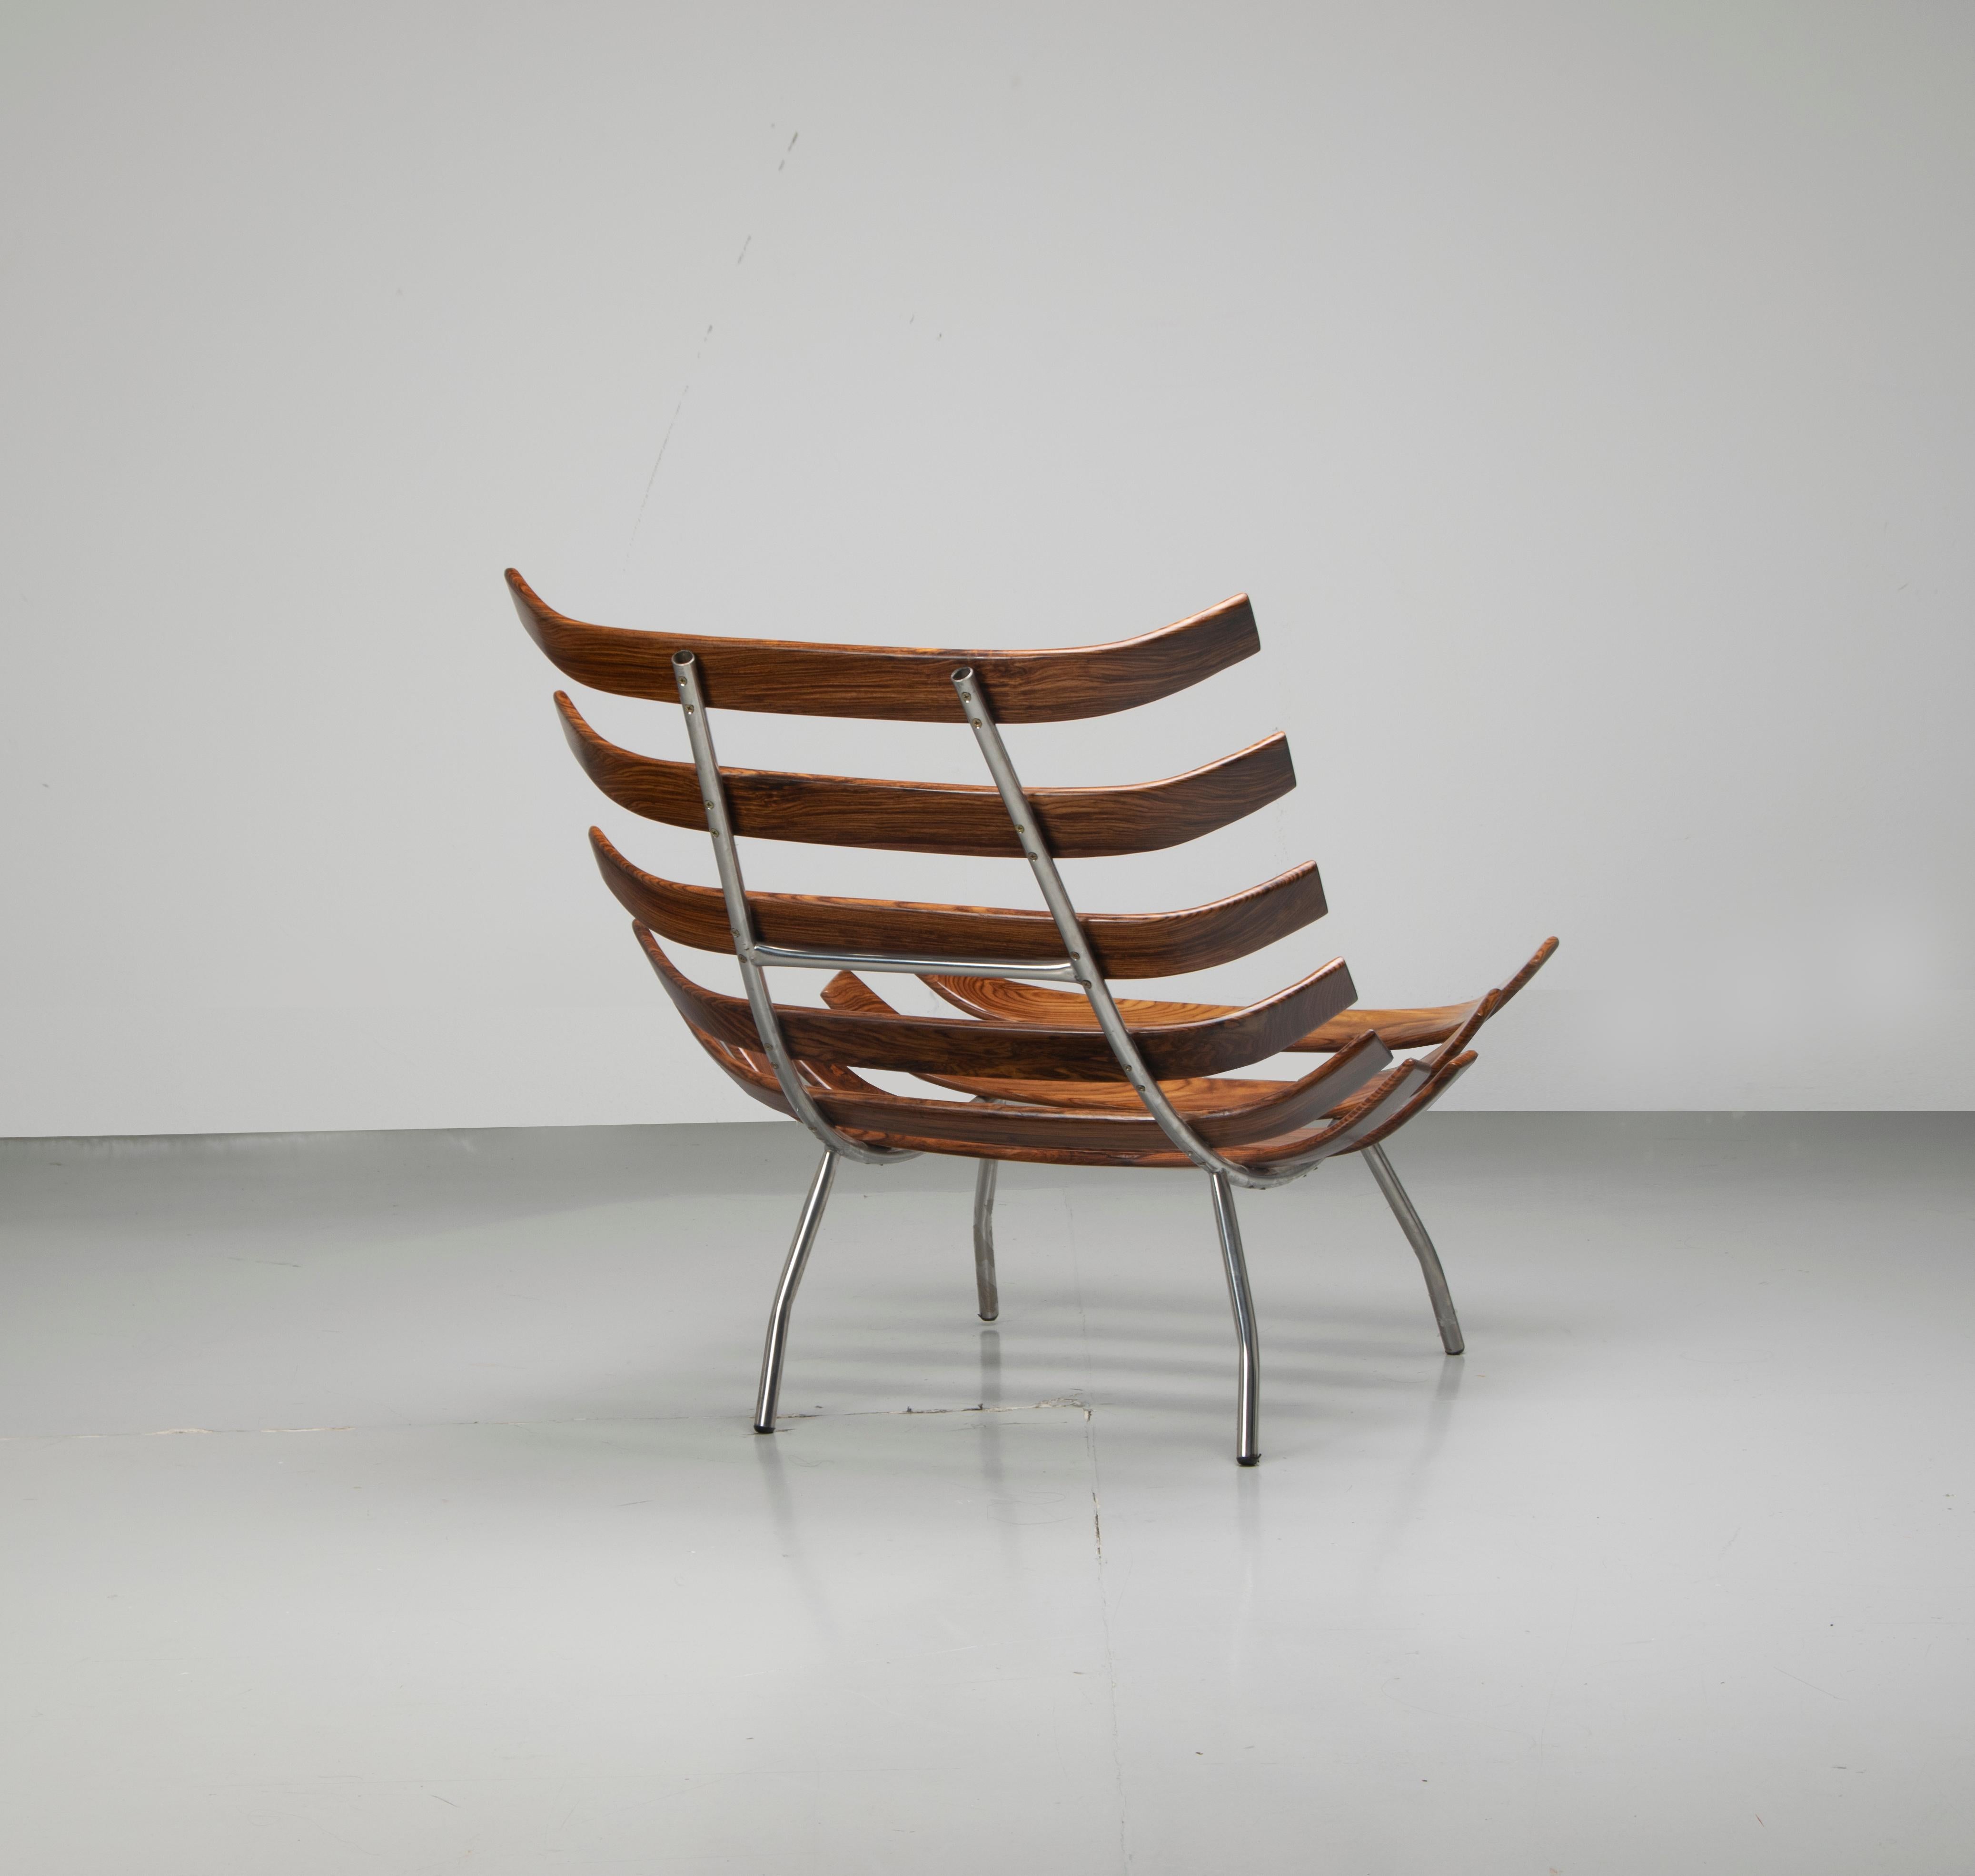 Rib chair (also called Costela chair) designed by Martin Eisler and Carlo Hauner in Brazilian Caviuna wood and metal. These chairs are iconic Brazilian Mid-Century Modern pieces, circa 1960. The chair has been recently reupholstered in off-white